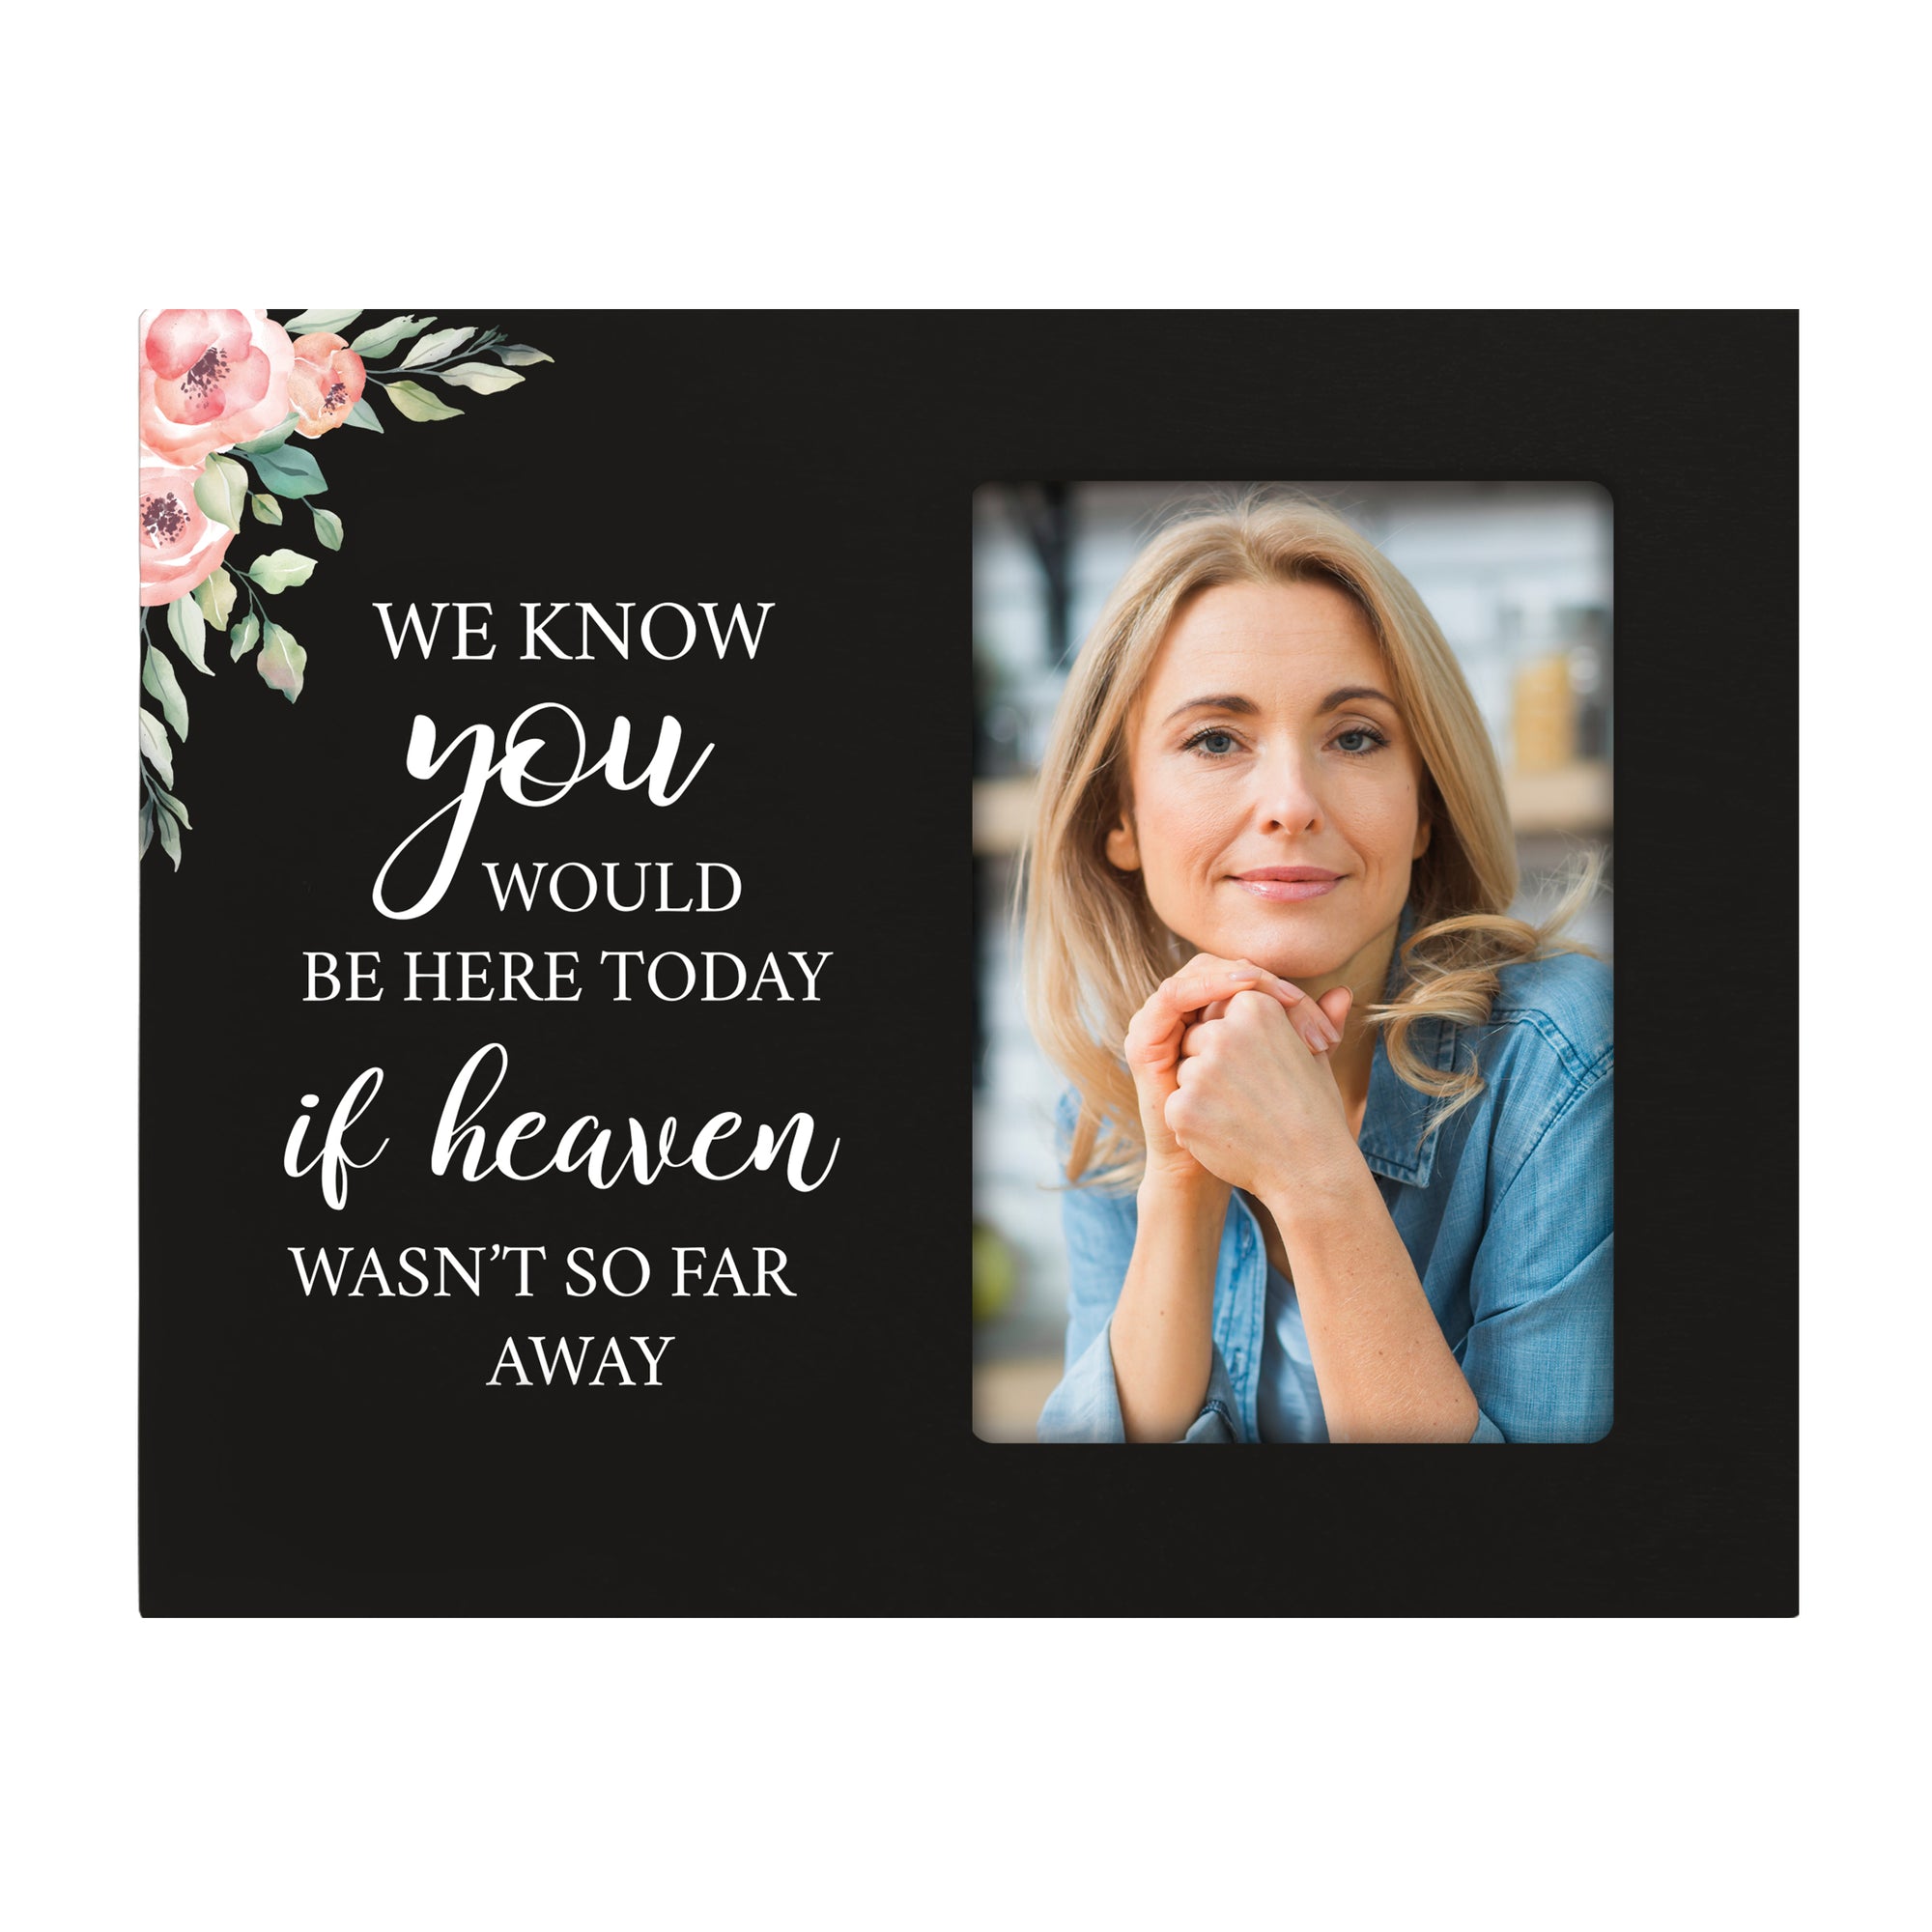 Rustic-Inspired Wooden Human Memorial Frames That Holds A 4x6in Photo - We Know You Would